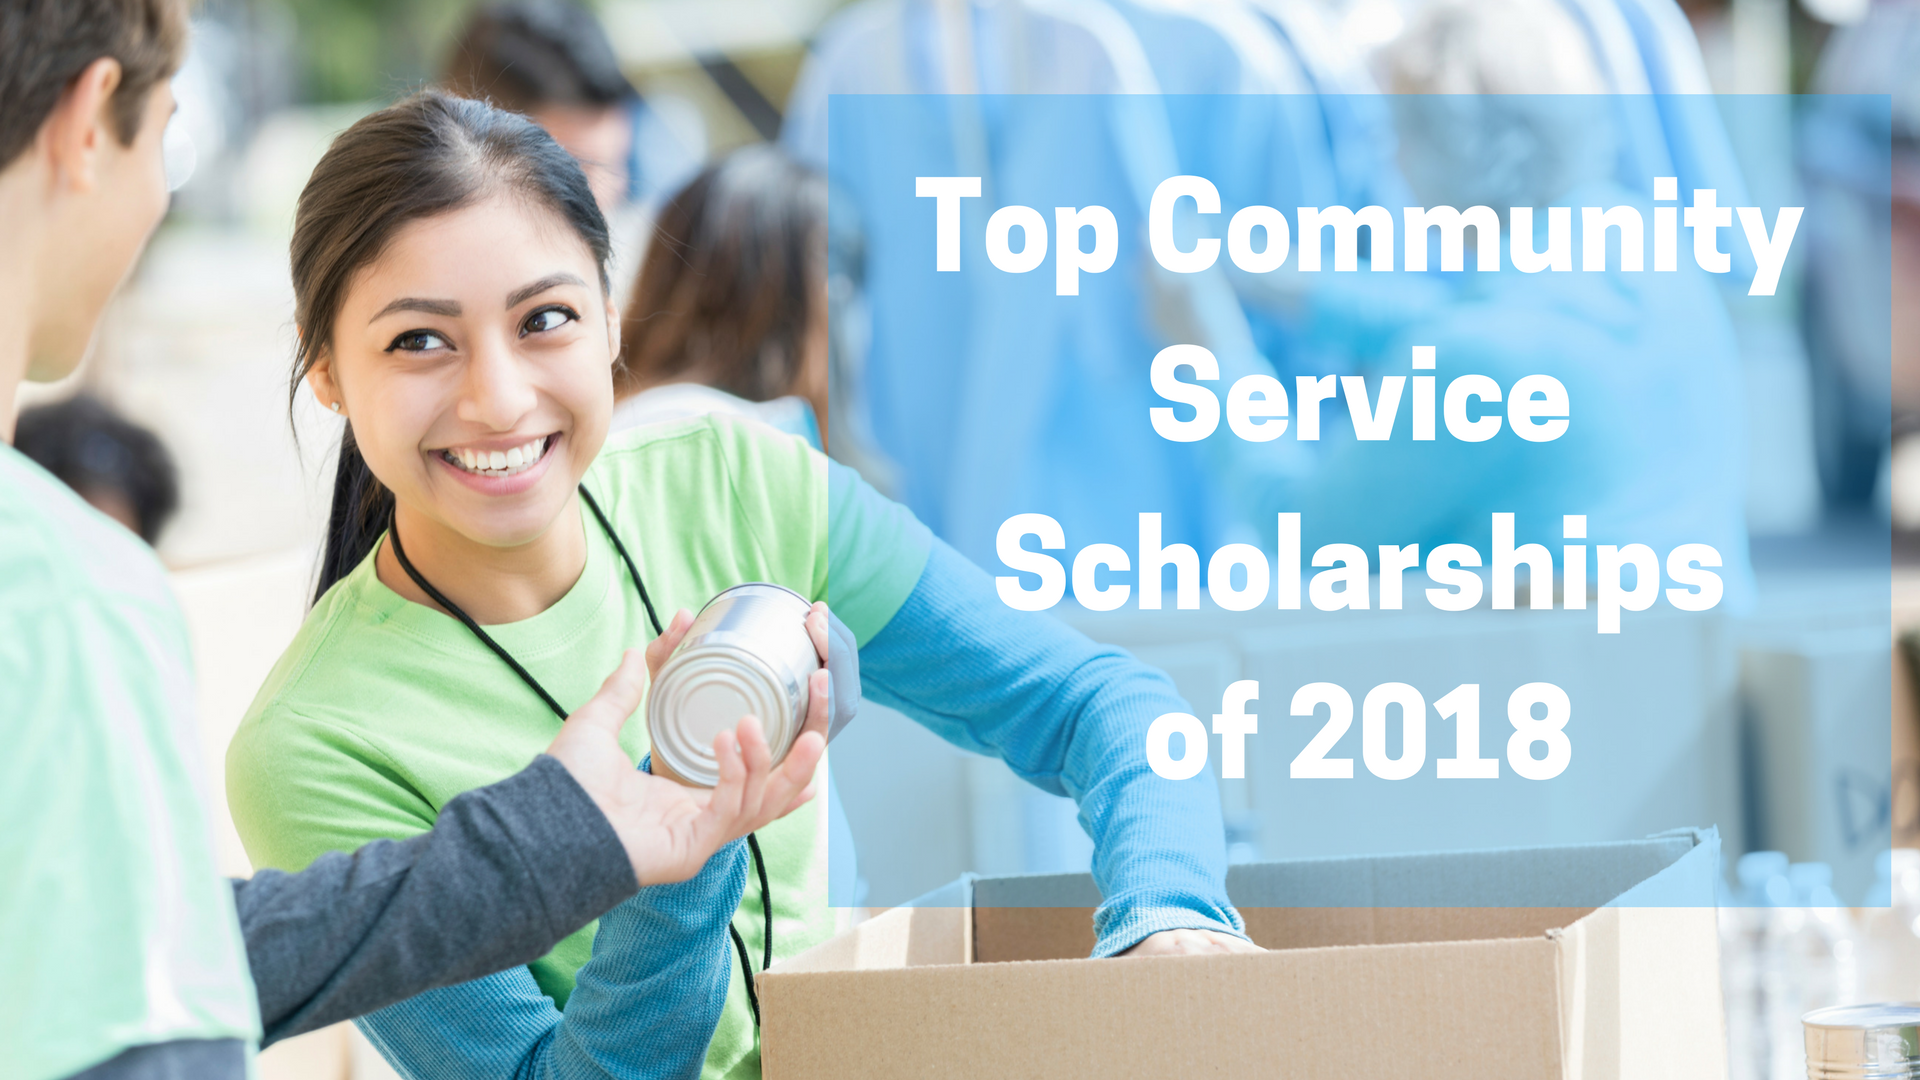 Top Community Service Scholarships of 2018